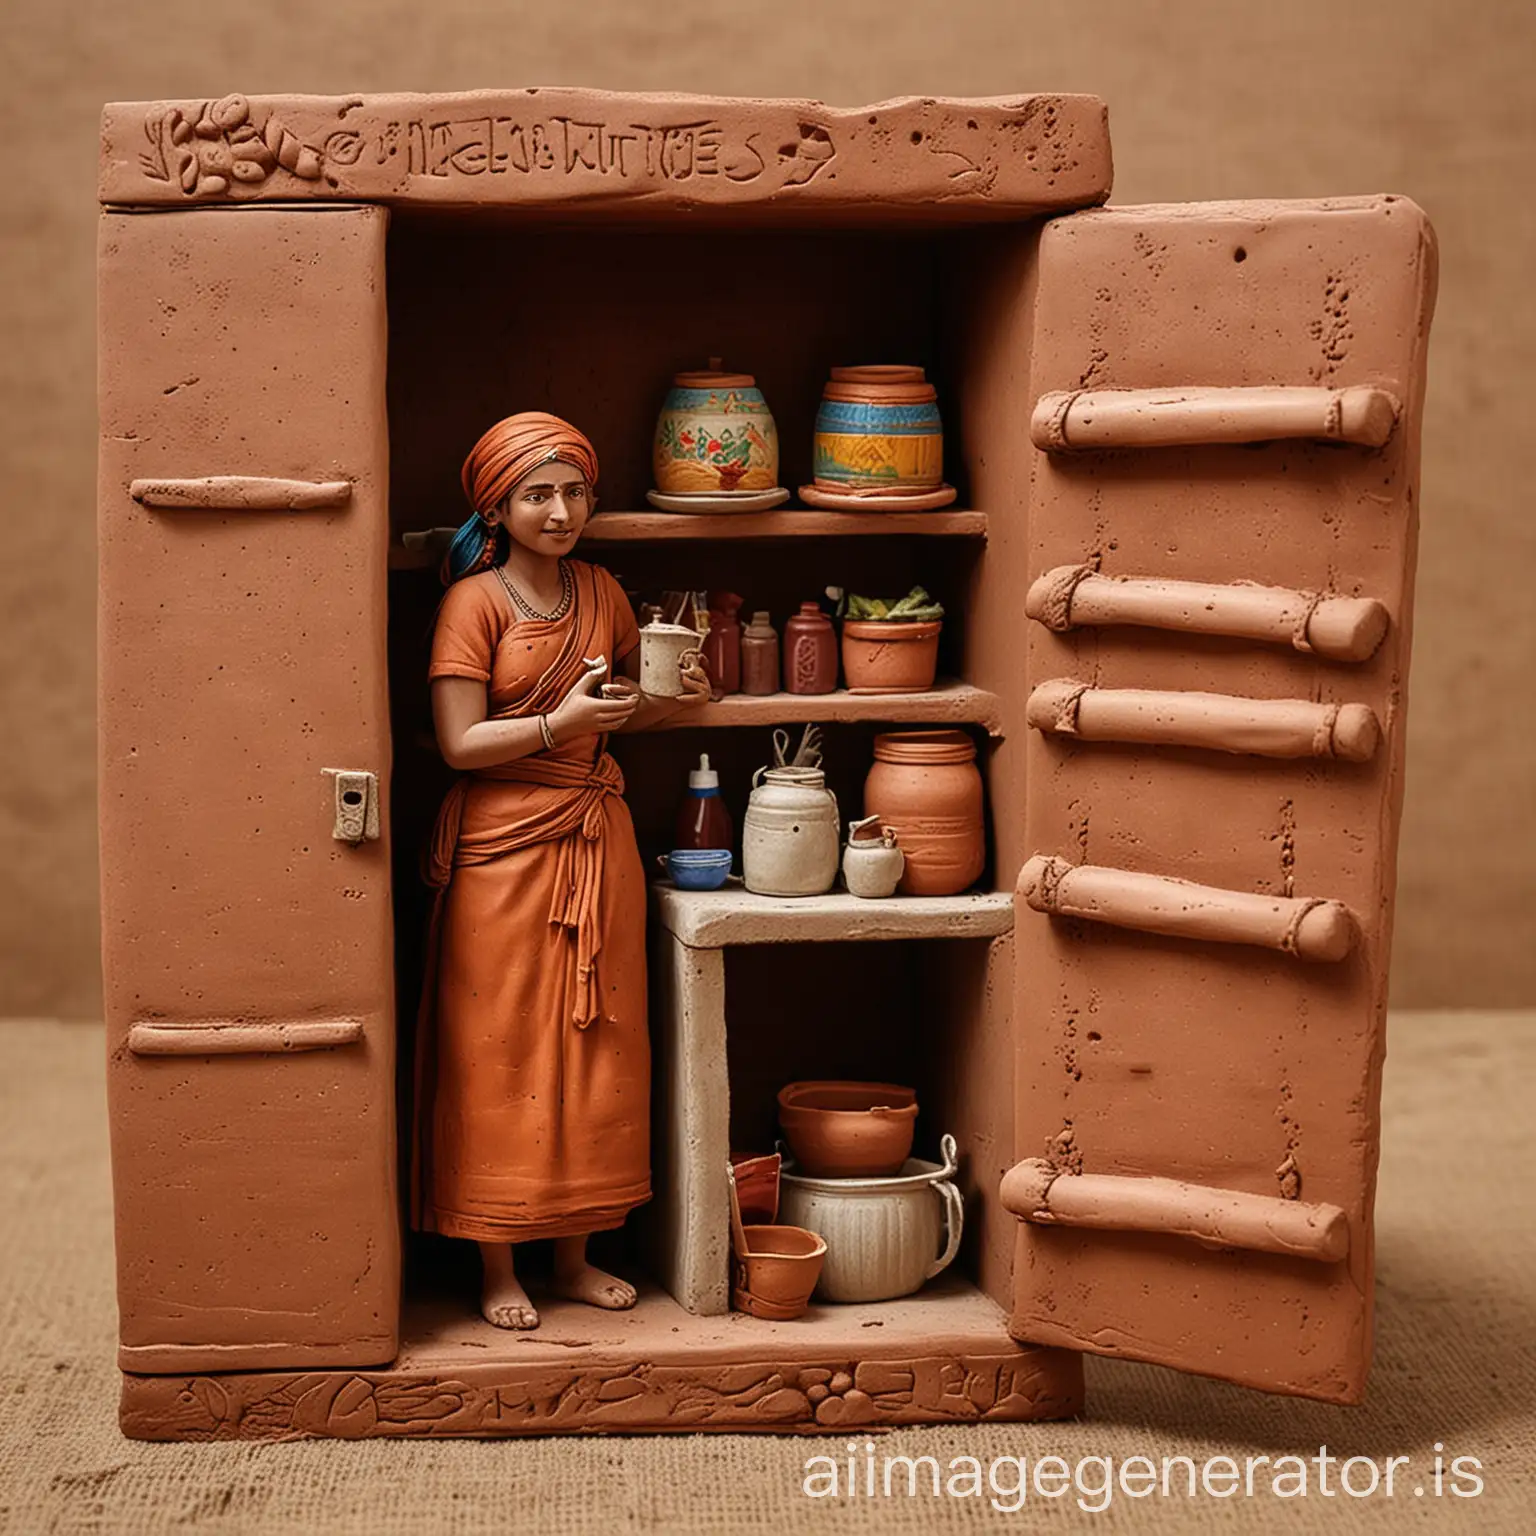 Realistic-Handmade-Clay-Fridge-Crafted-by-Village-Woman